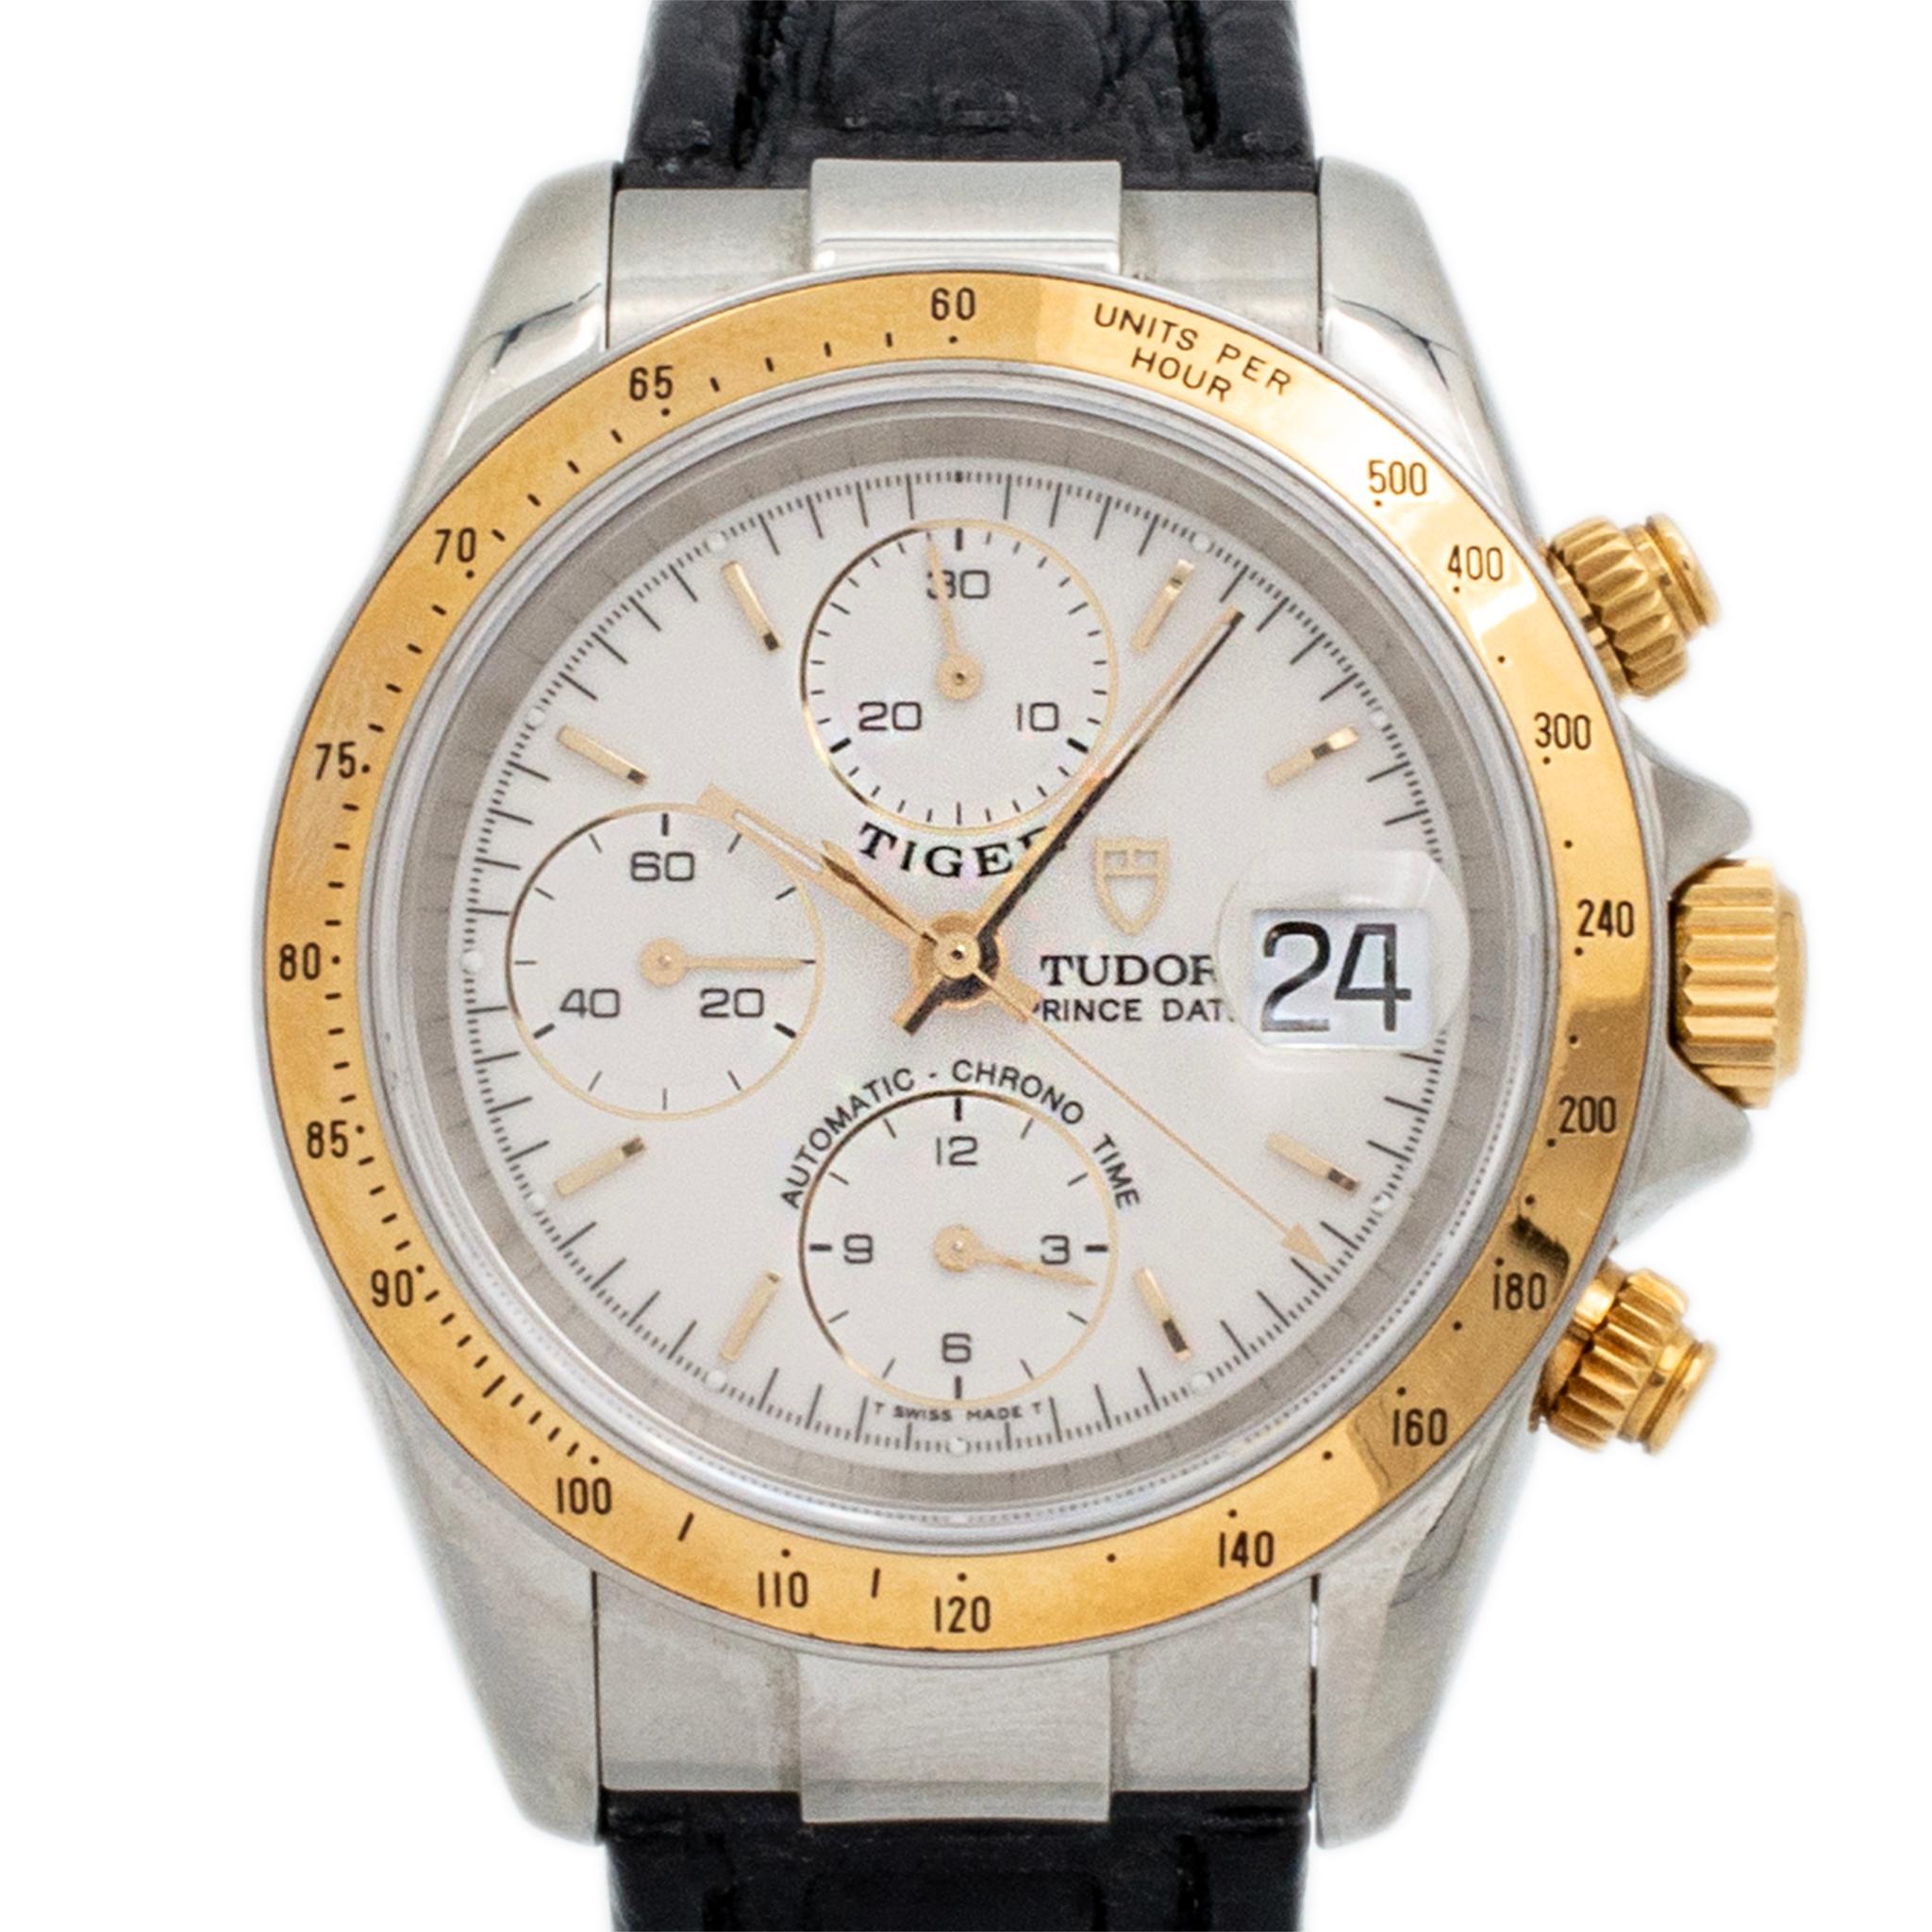 Brand: Tudor

Gender: Men's

Metal Type: Stainless Steel 18K Yellow Gold

Weight: 102.20 grams

Stainless steel and 18K yellow gold TUDOR Swiss made watch. The 